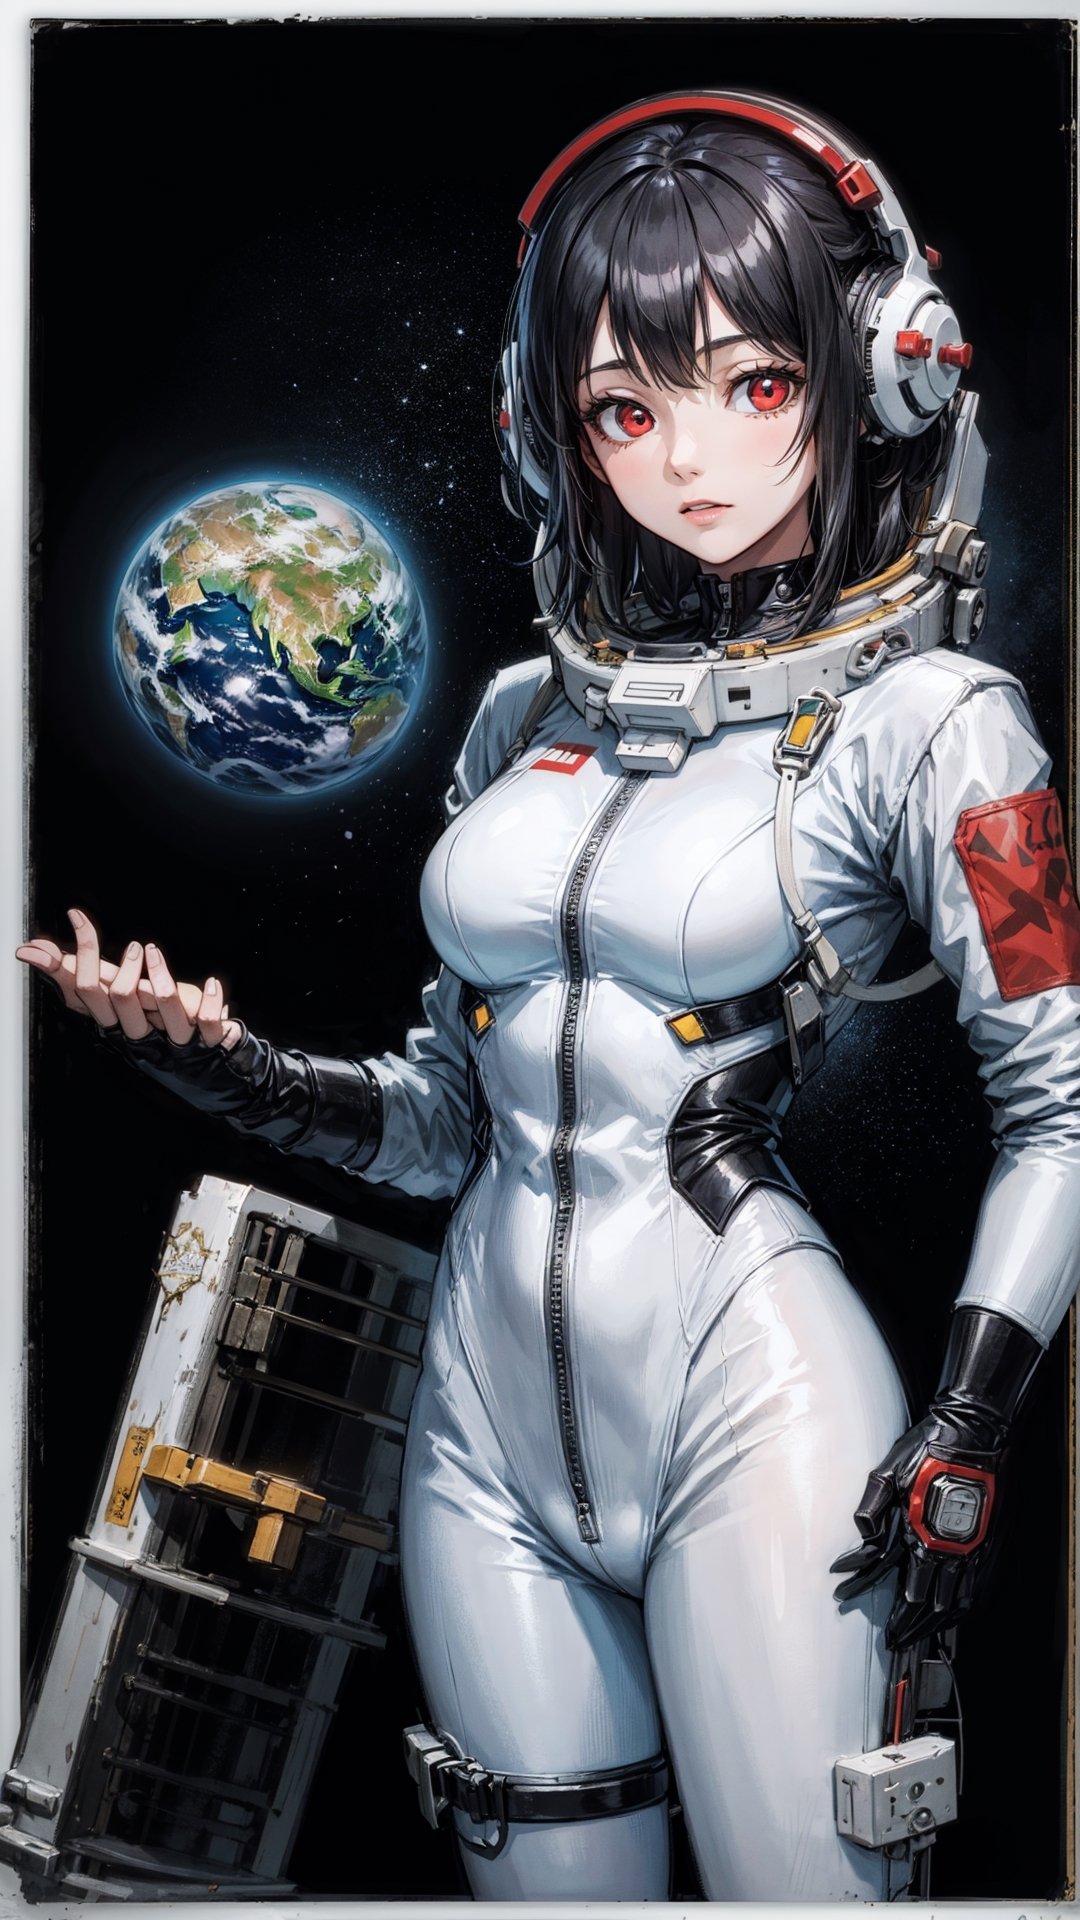 CCCPposter, sovietposter, artwork, girl,painting on Half-white paper, Vibrant colors, Soviet spacesuit, red eyes, black hair, monochrome background, Salyut space station, magnificent blue Earth.